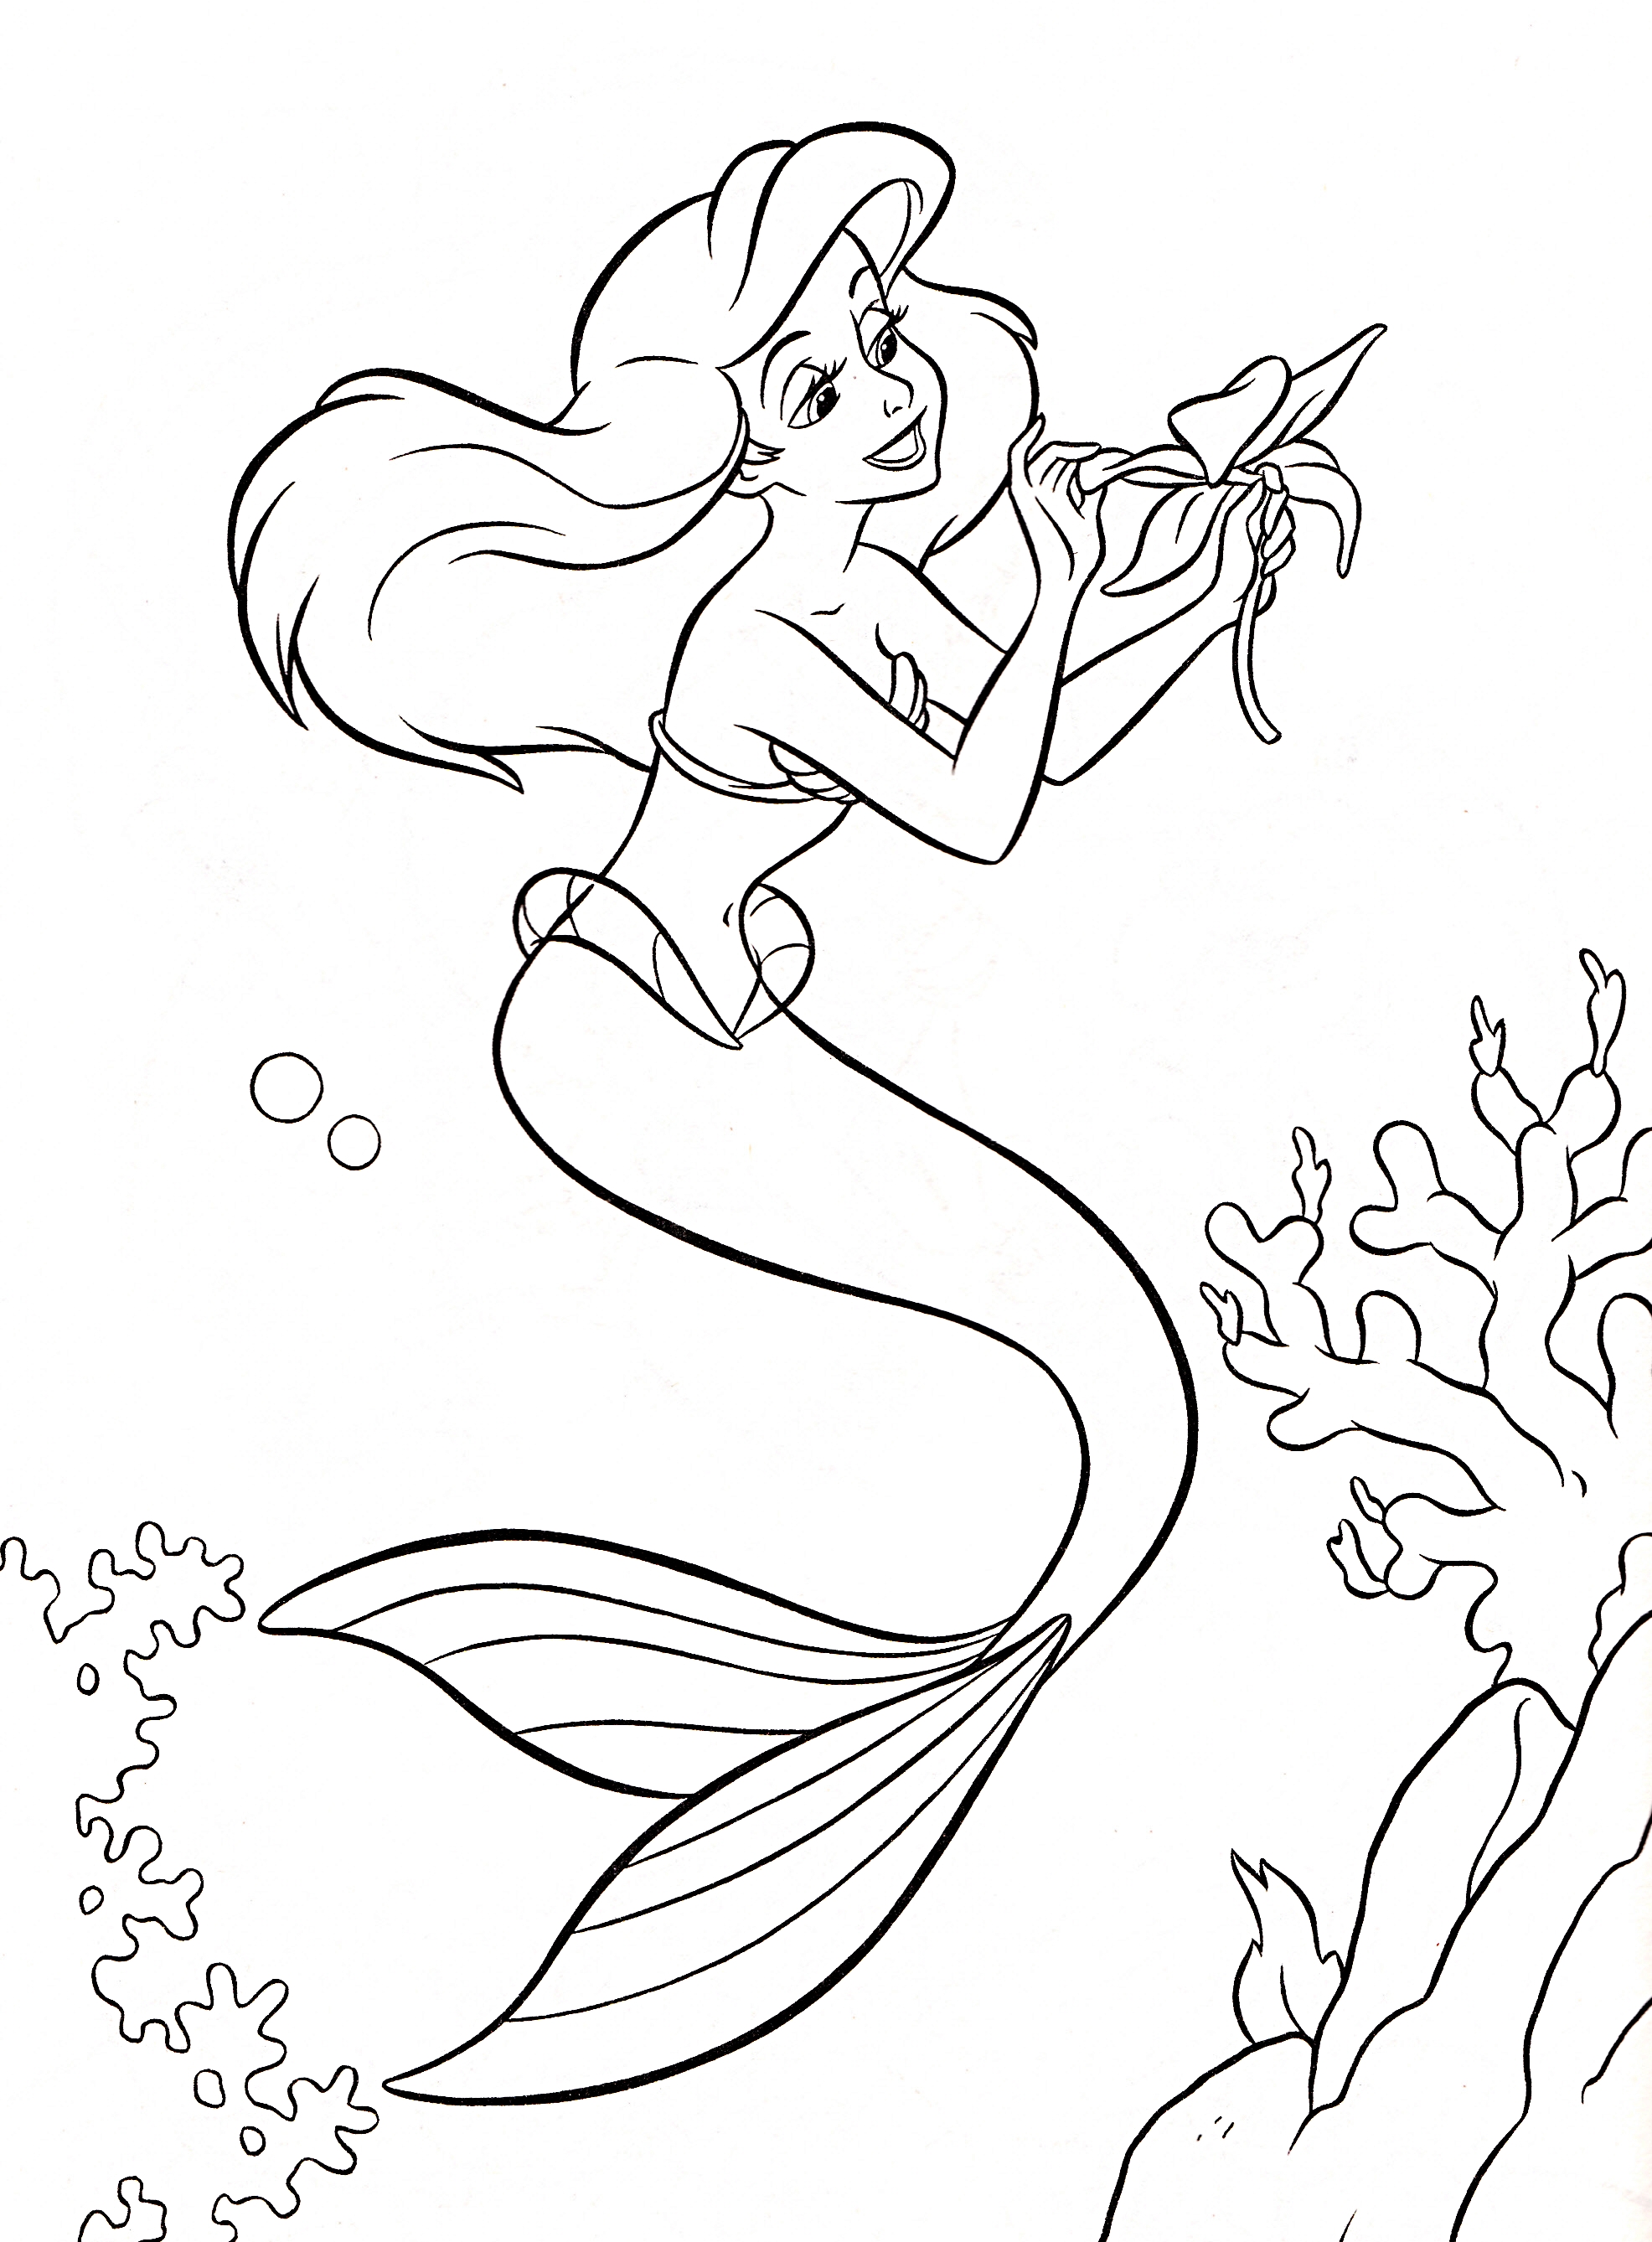 princess coloring pages free